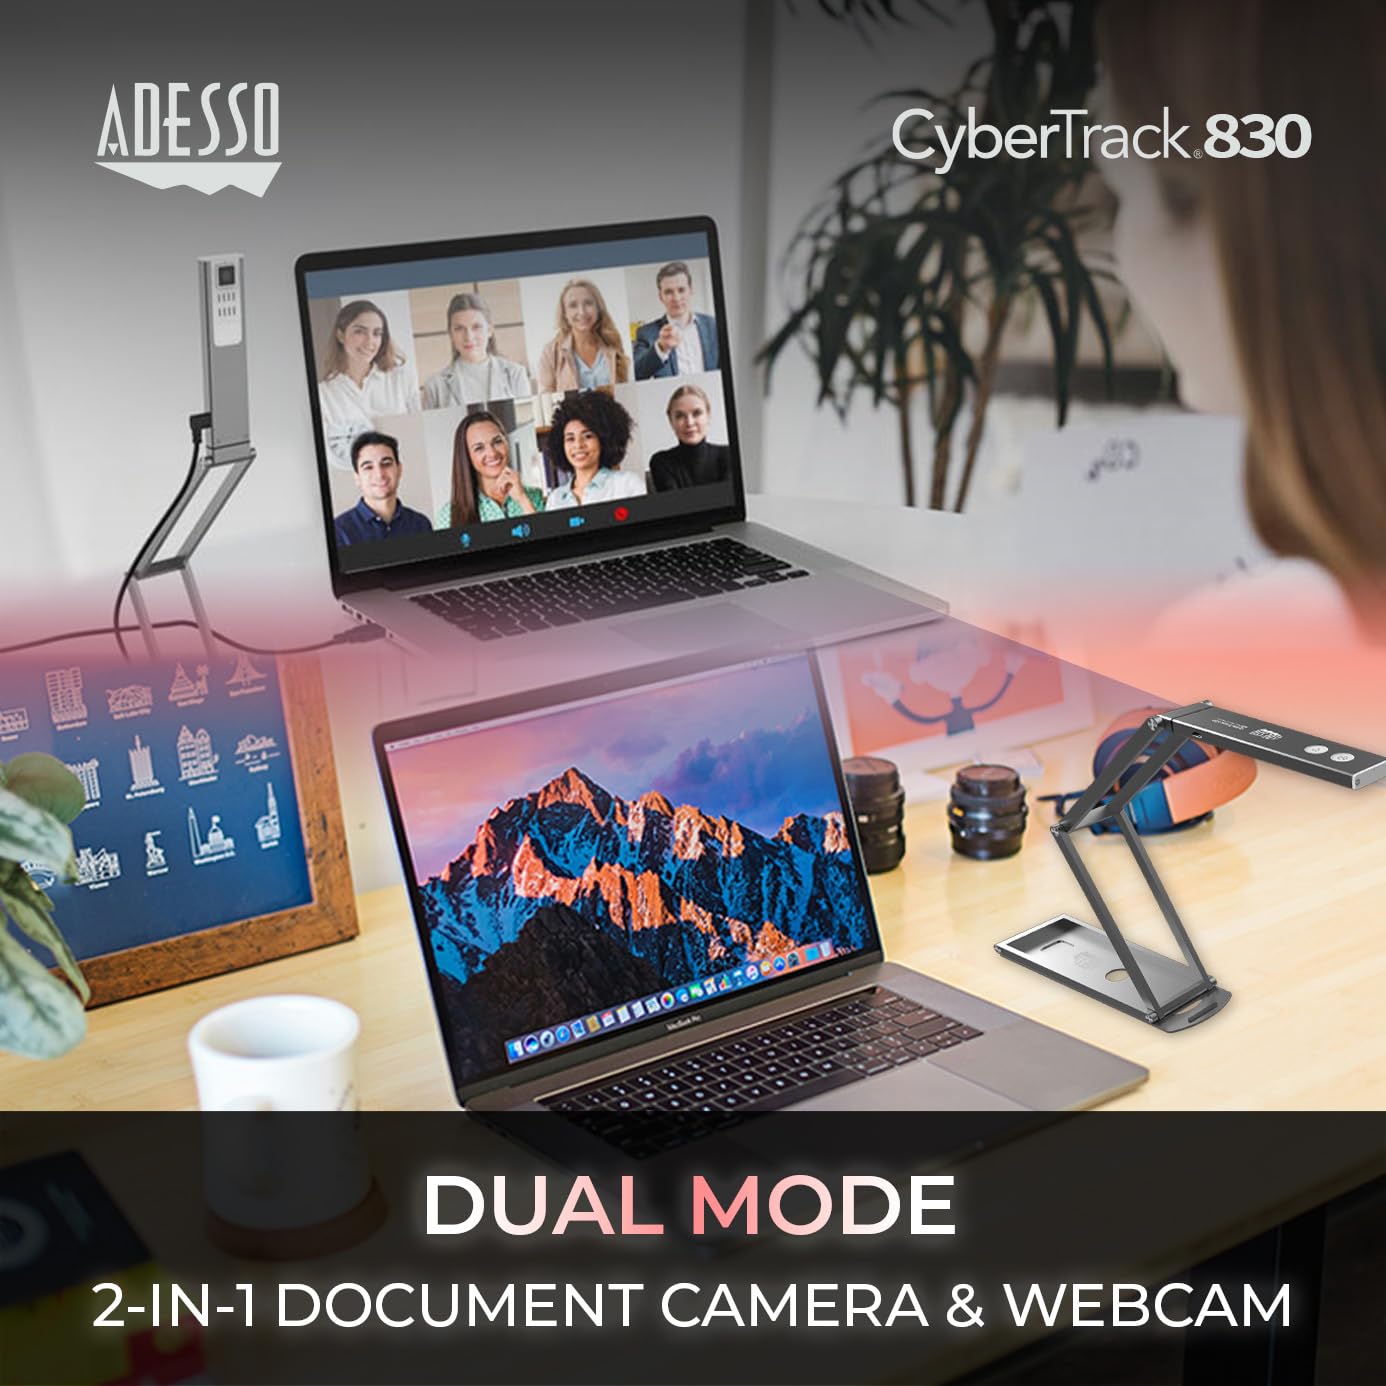 Adesso 4K Ultra HD 8MP USB Document Camera & Webcam with Built-in Microphone, LED Light, Autofocus, Multi-Jointed Design, Folding for Live Demo, Web Conferencing, Distance Learning, Remote Teaching